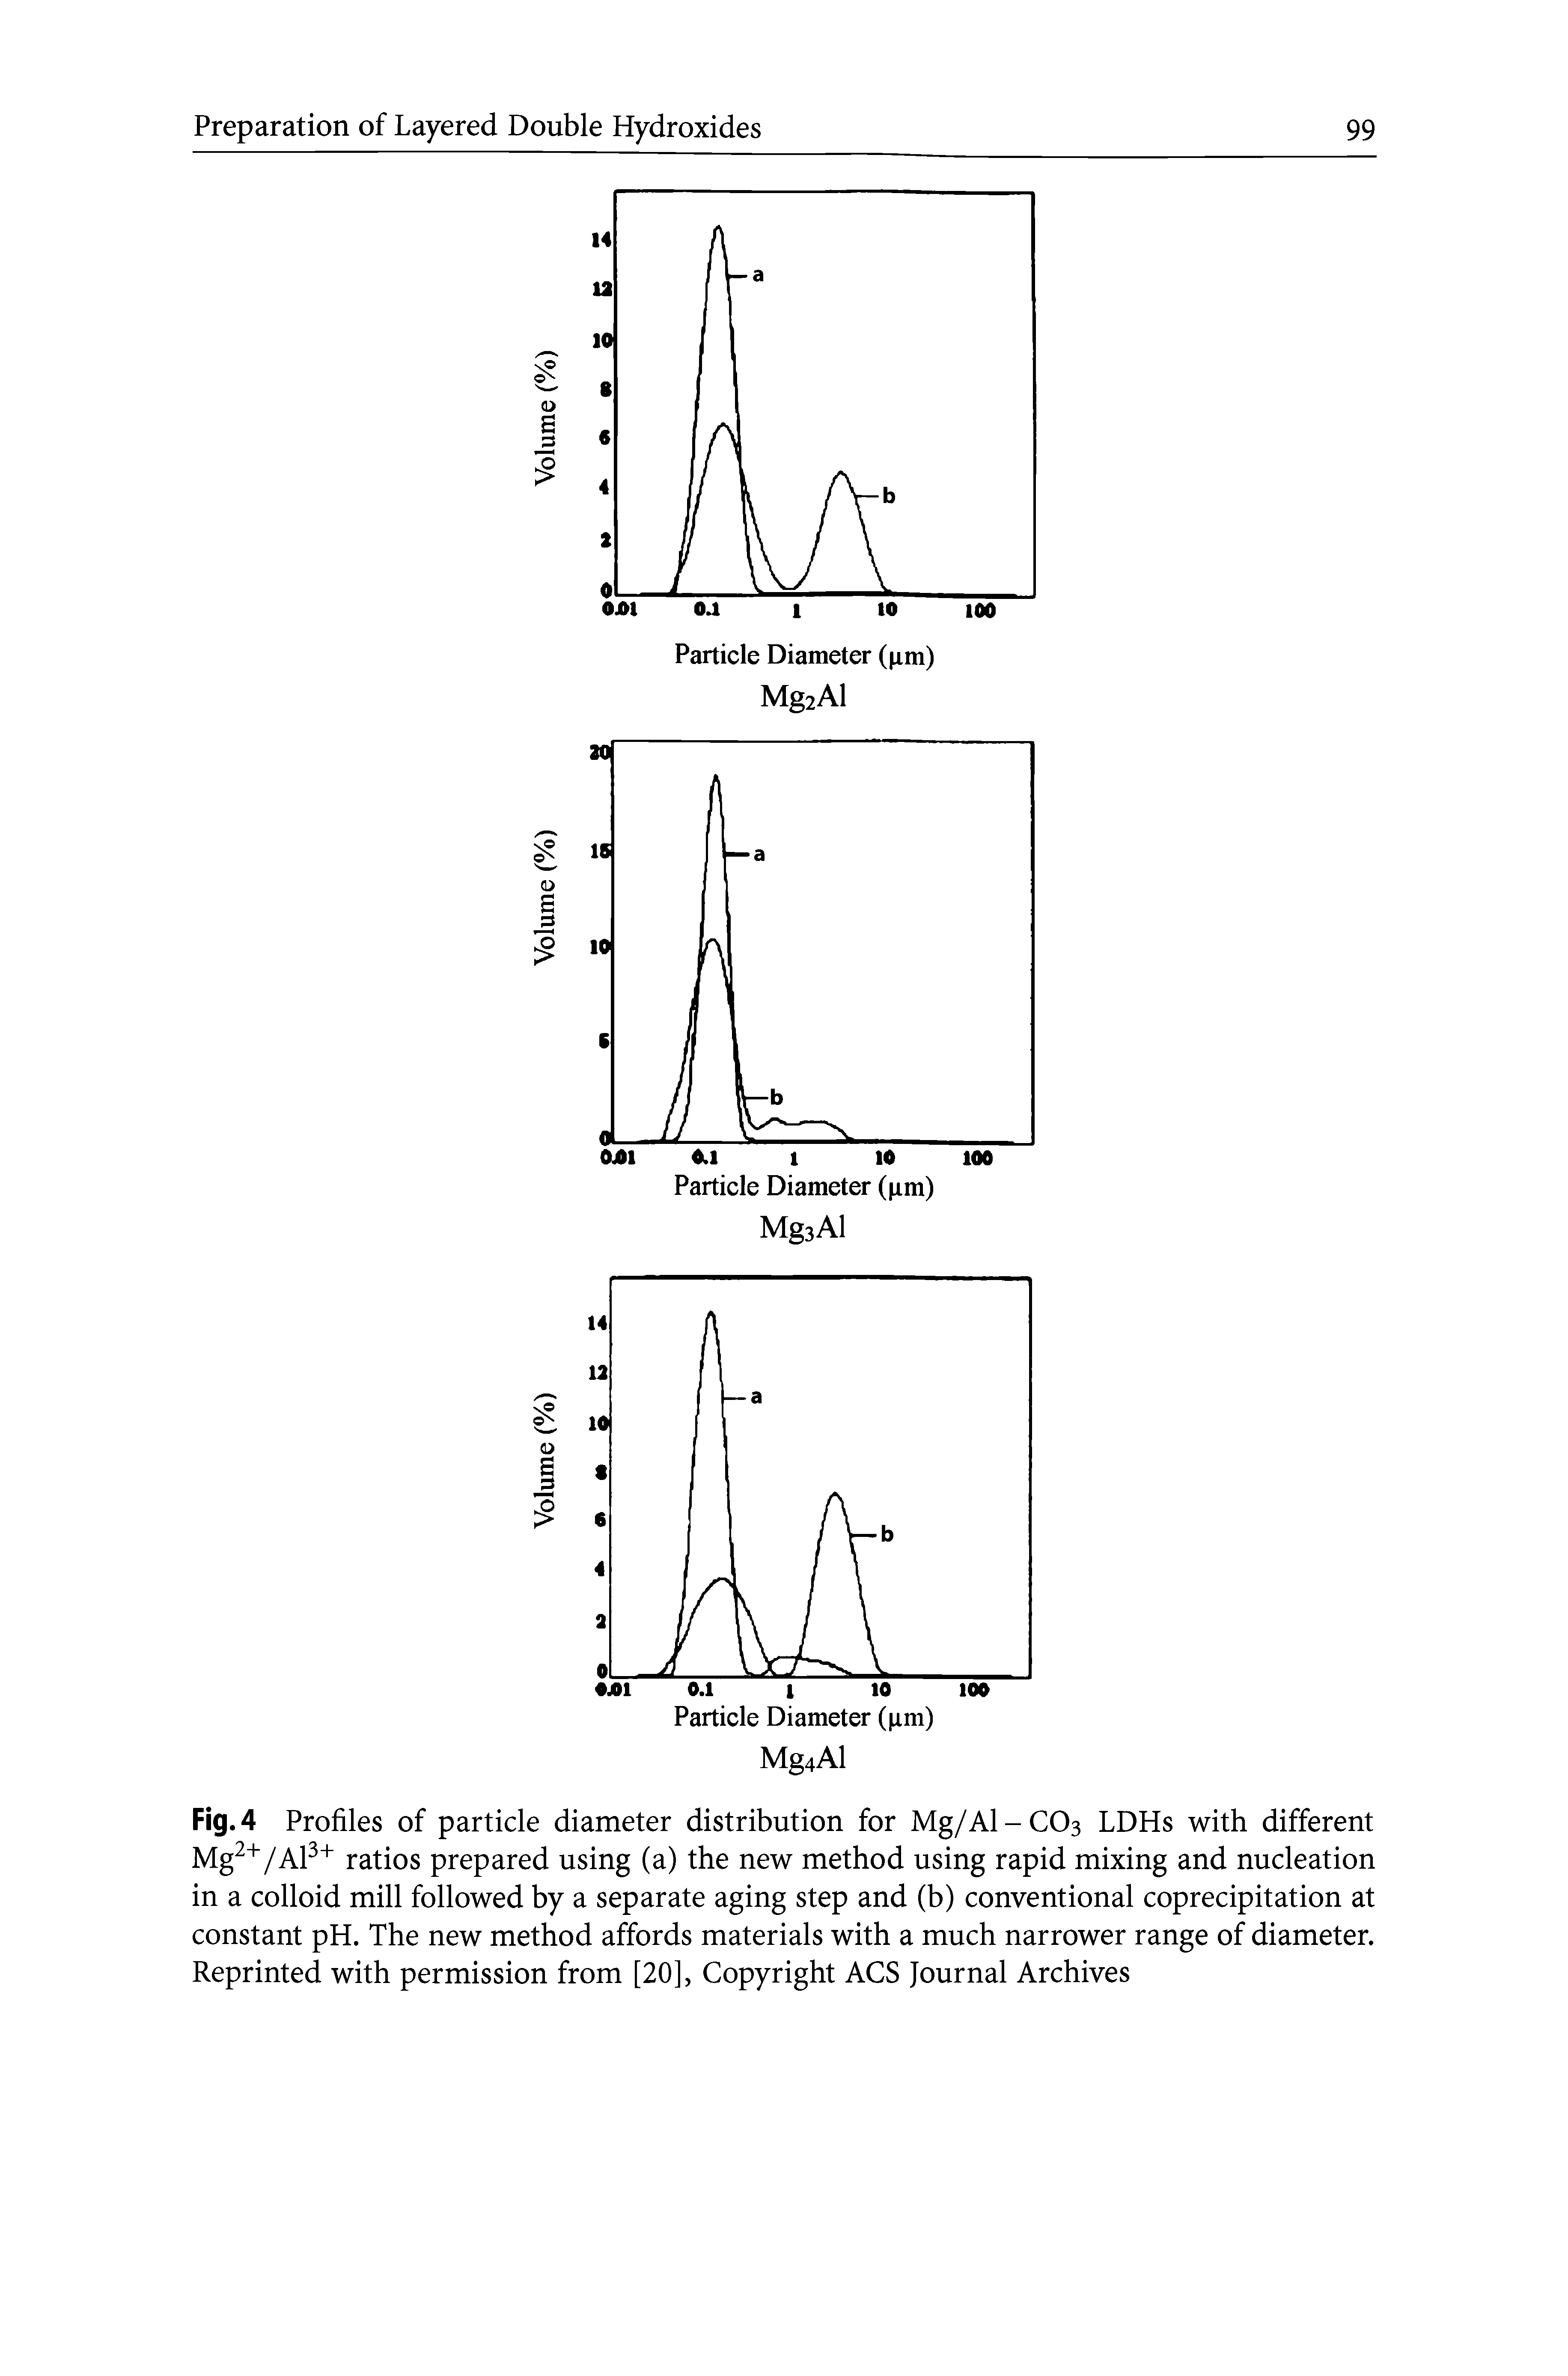 Fig. 4 Profiles of particle diameter distribution for Mg/Al-COs LDHs with different ratios prepared using (a) the new method using rapid mixing and nucleation in a colloid mill followed by a separate aging step and (b) conventional coprecipitation at constant pH. The new method affords materials with a much narrower range of diameter. Reprinted with permission from [20], Copyright ACS Journal Archives...